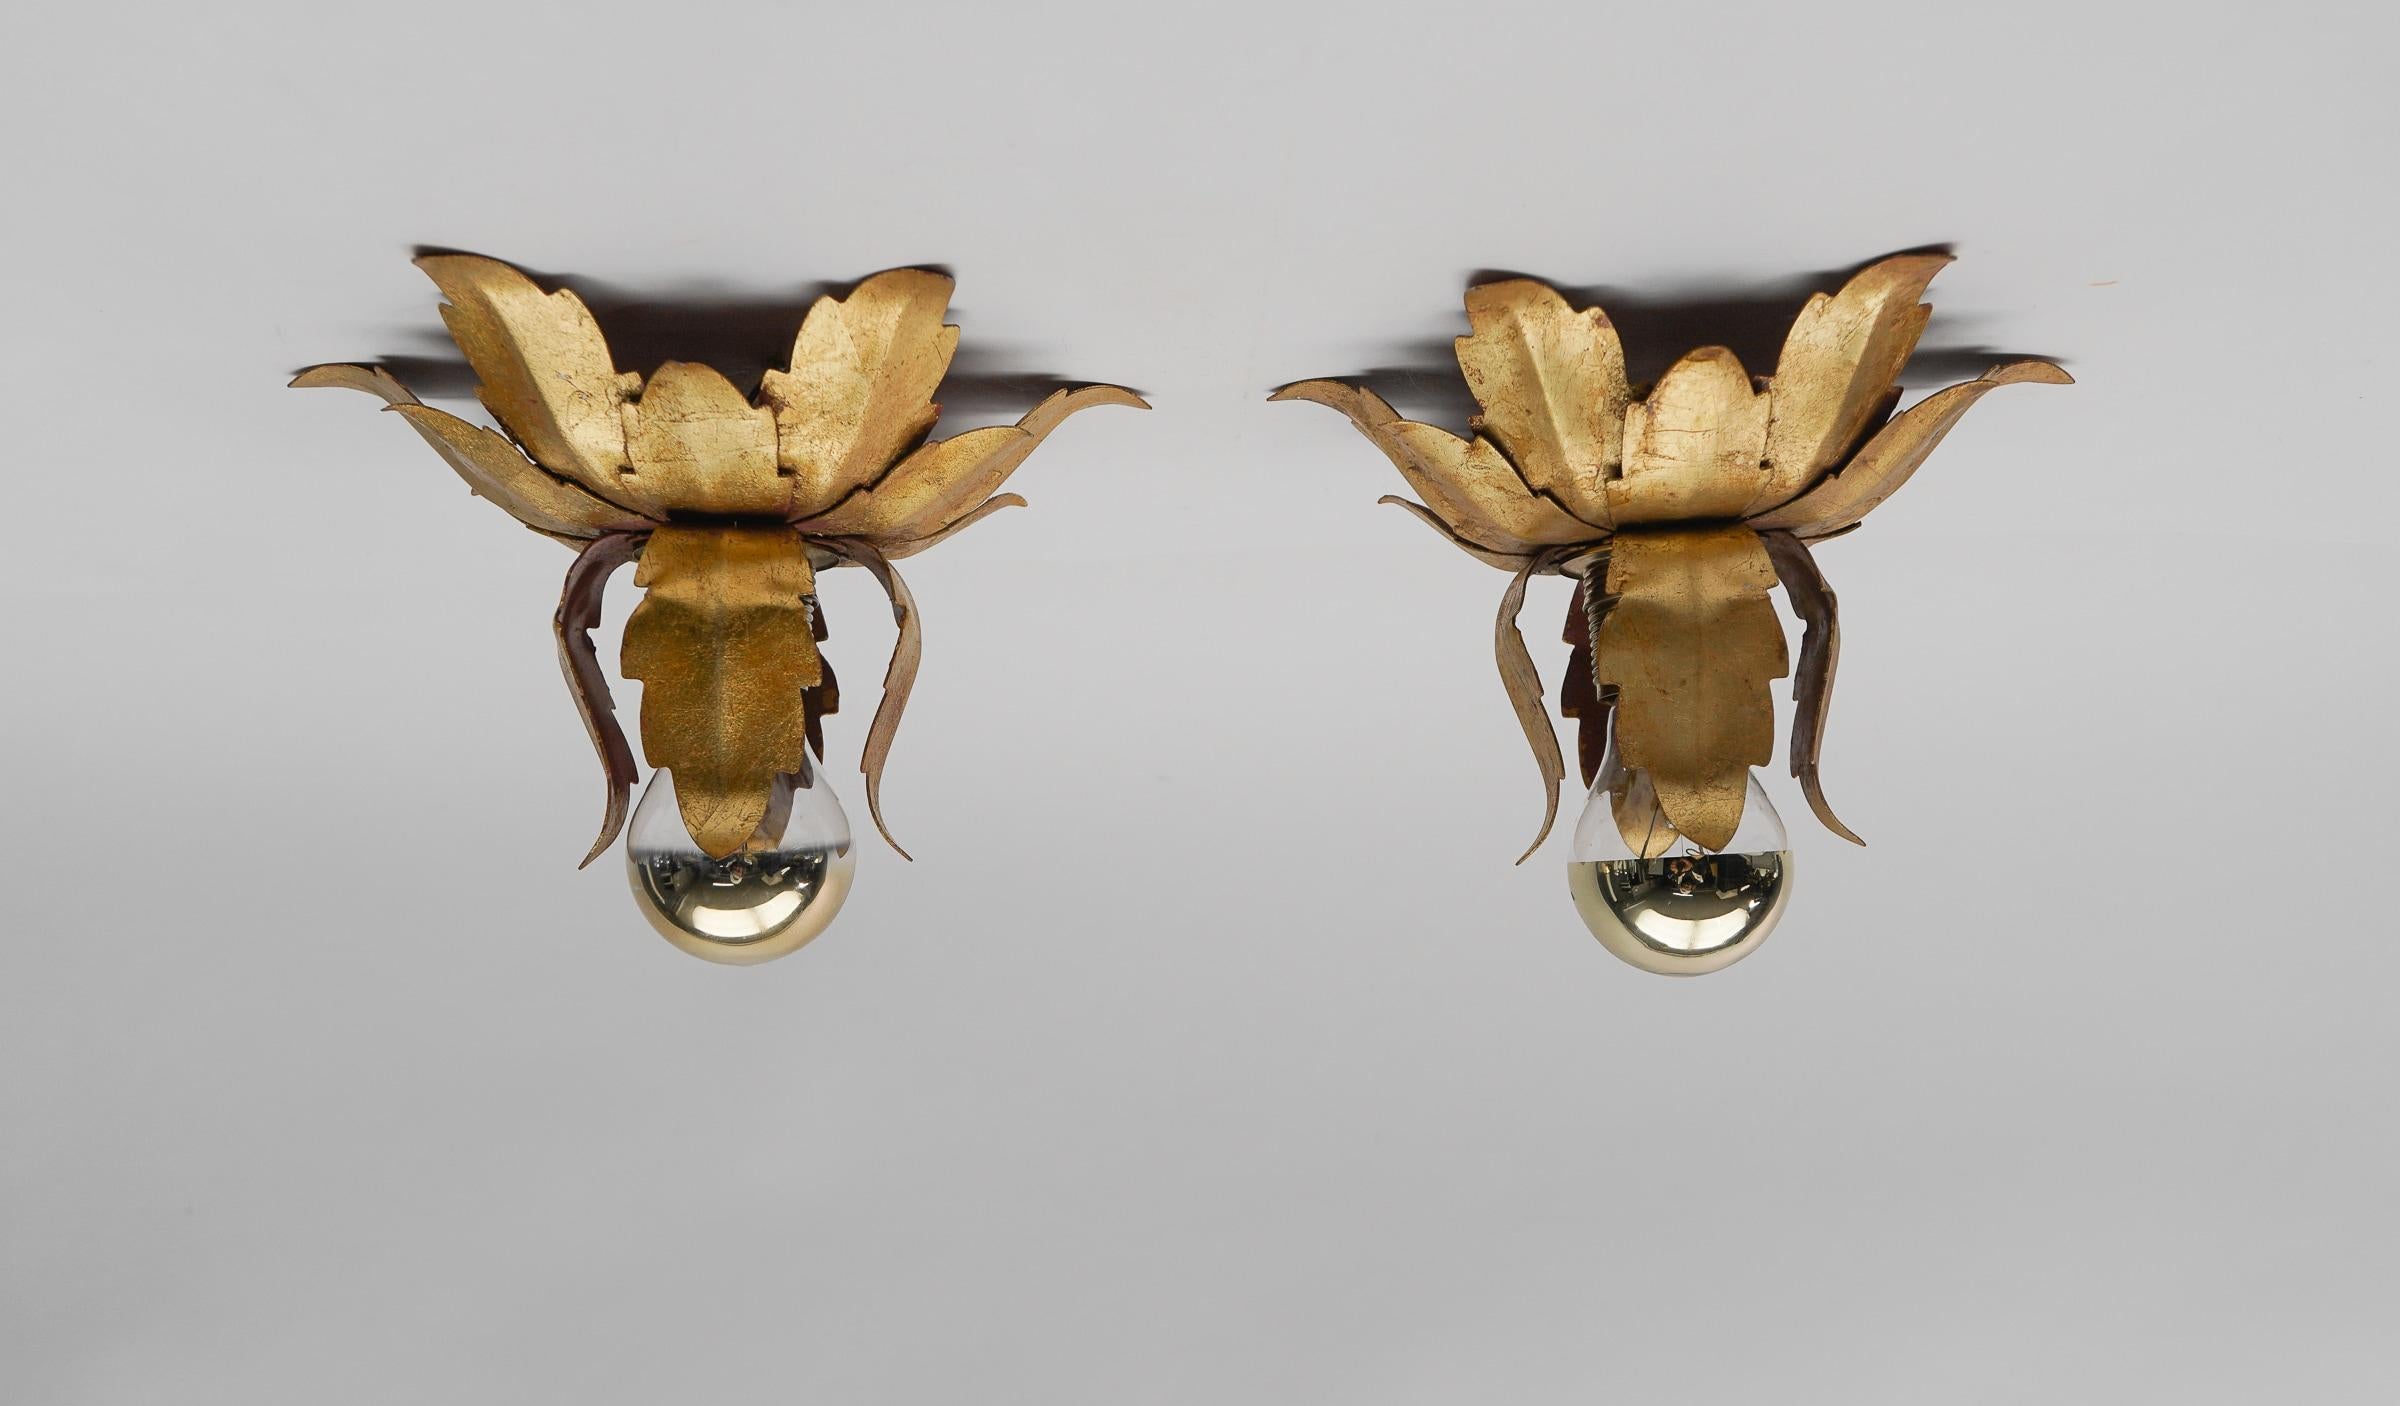 Pair of Petit Hollywood Regency Gilt Lamps, 1960s Italy For Sale 3